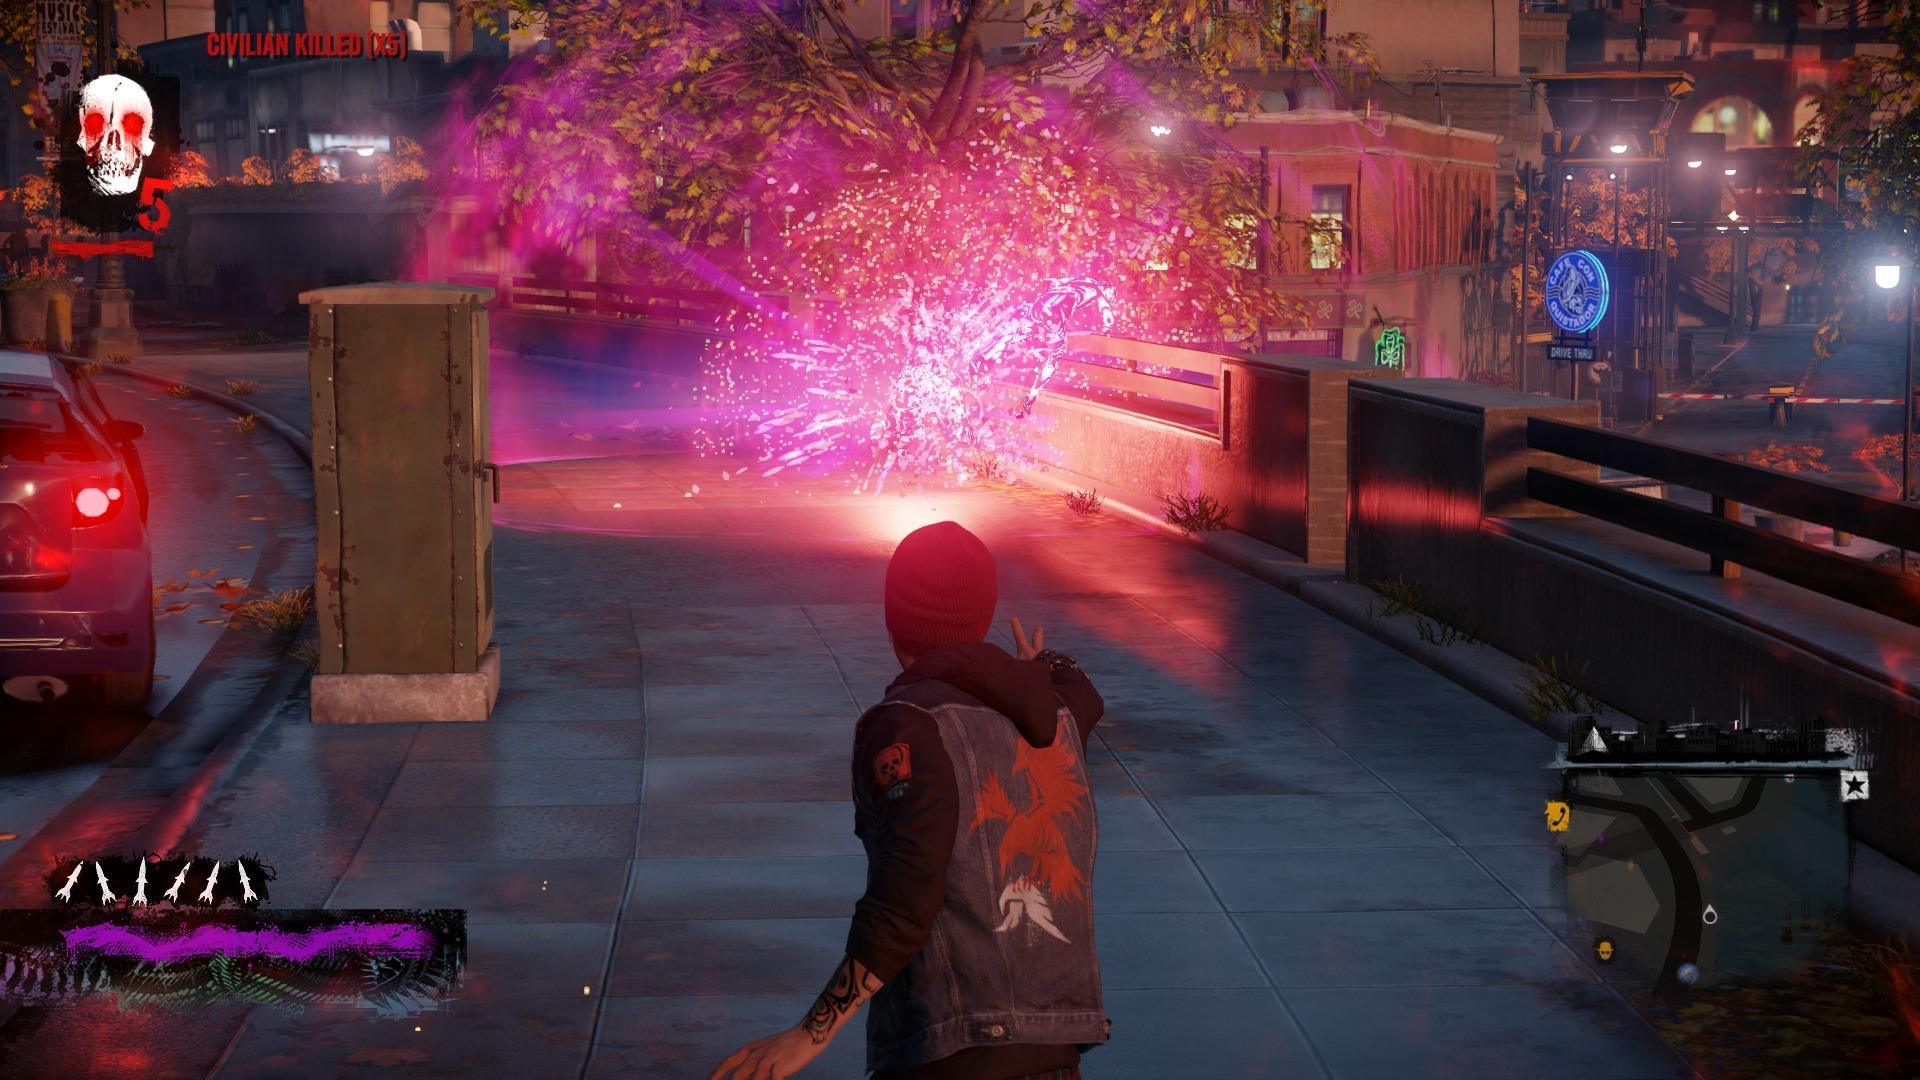 Ps4 second. Infamous ps4. Infamous: second son. Second son ps4. Infamous second son ps4.